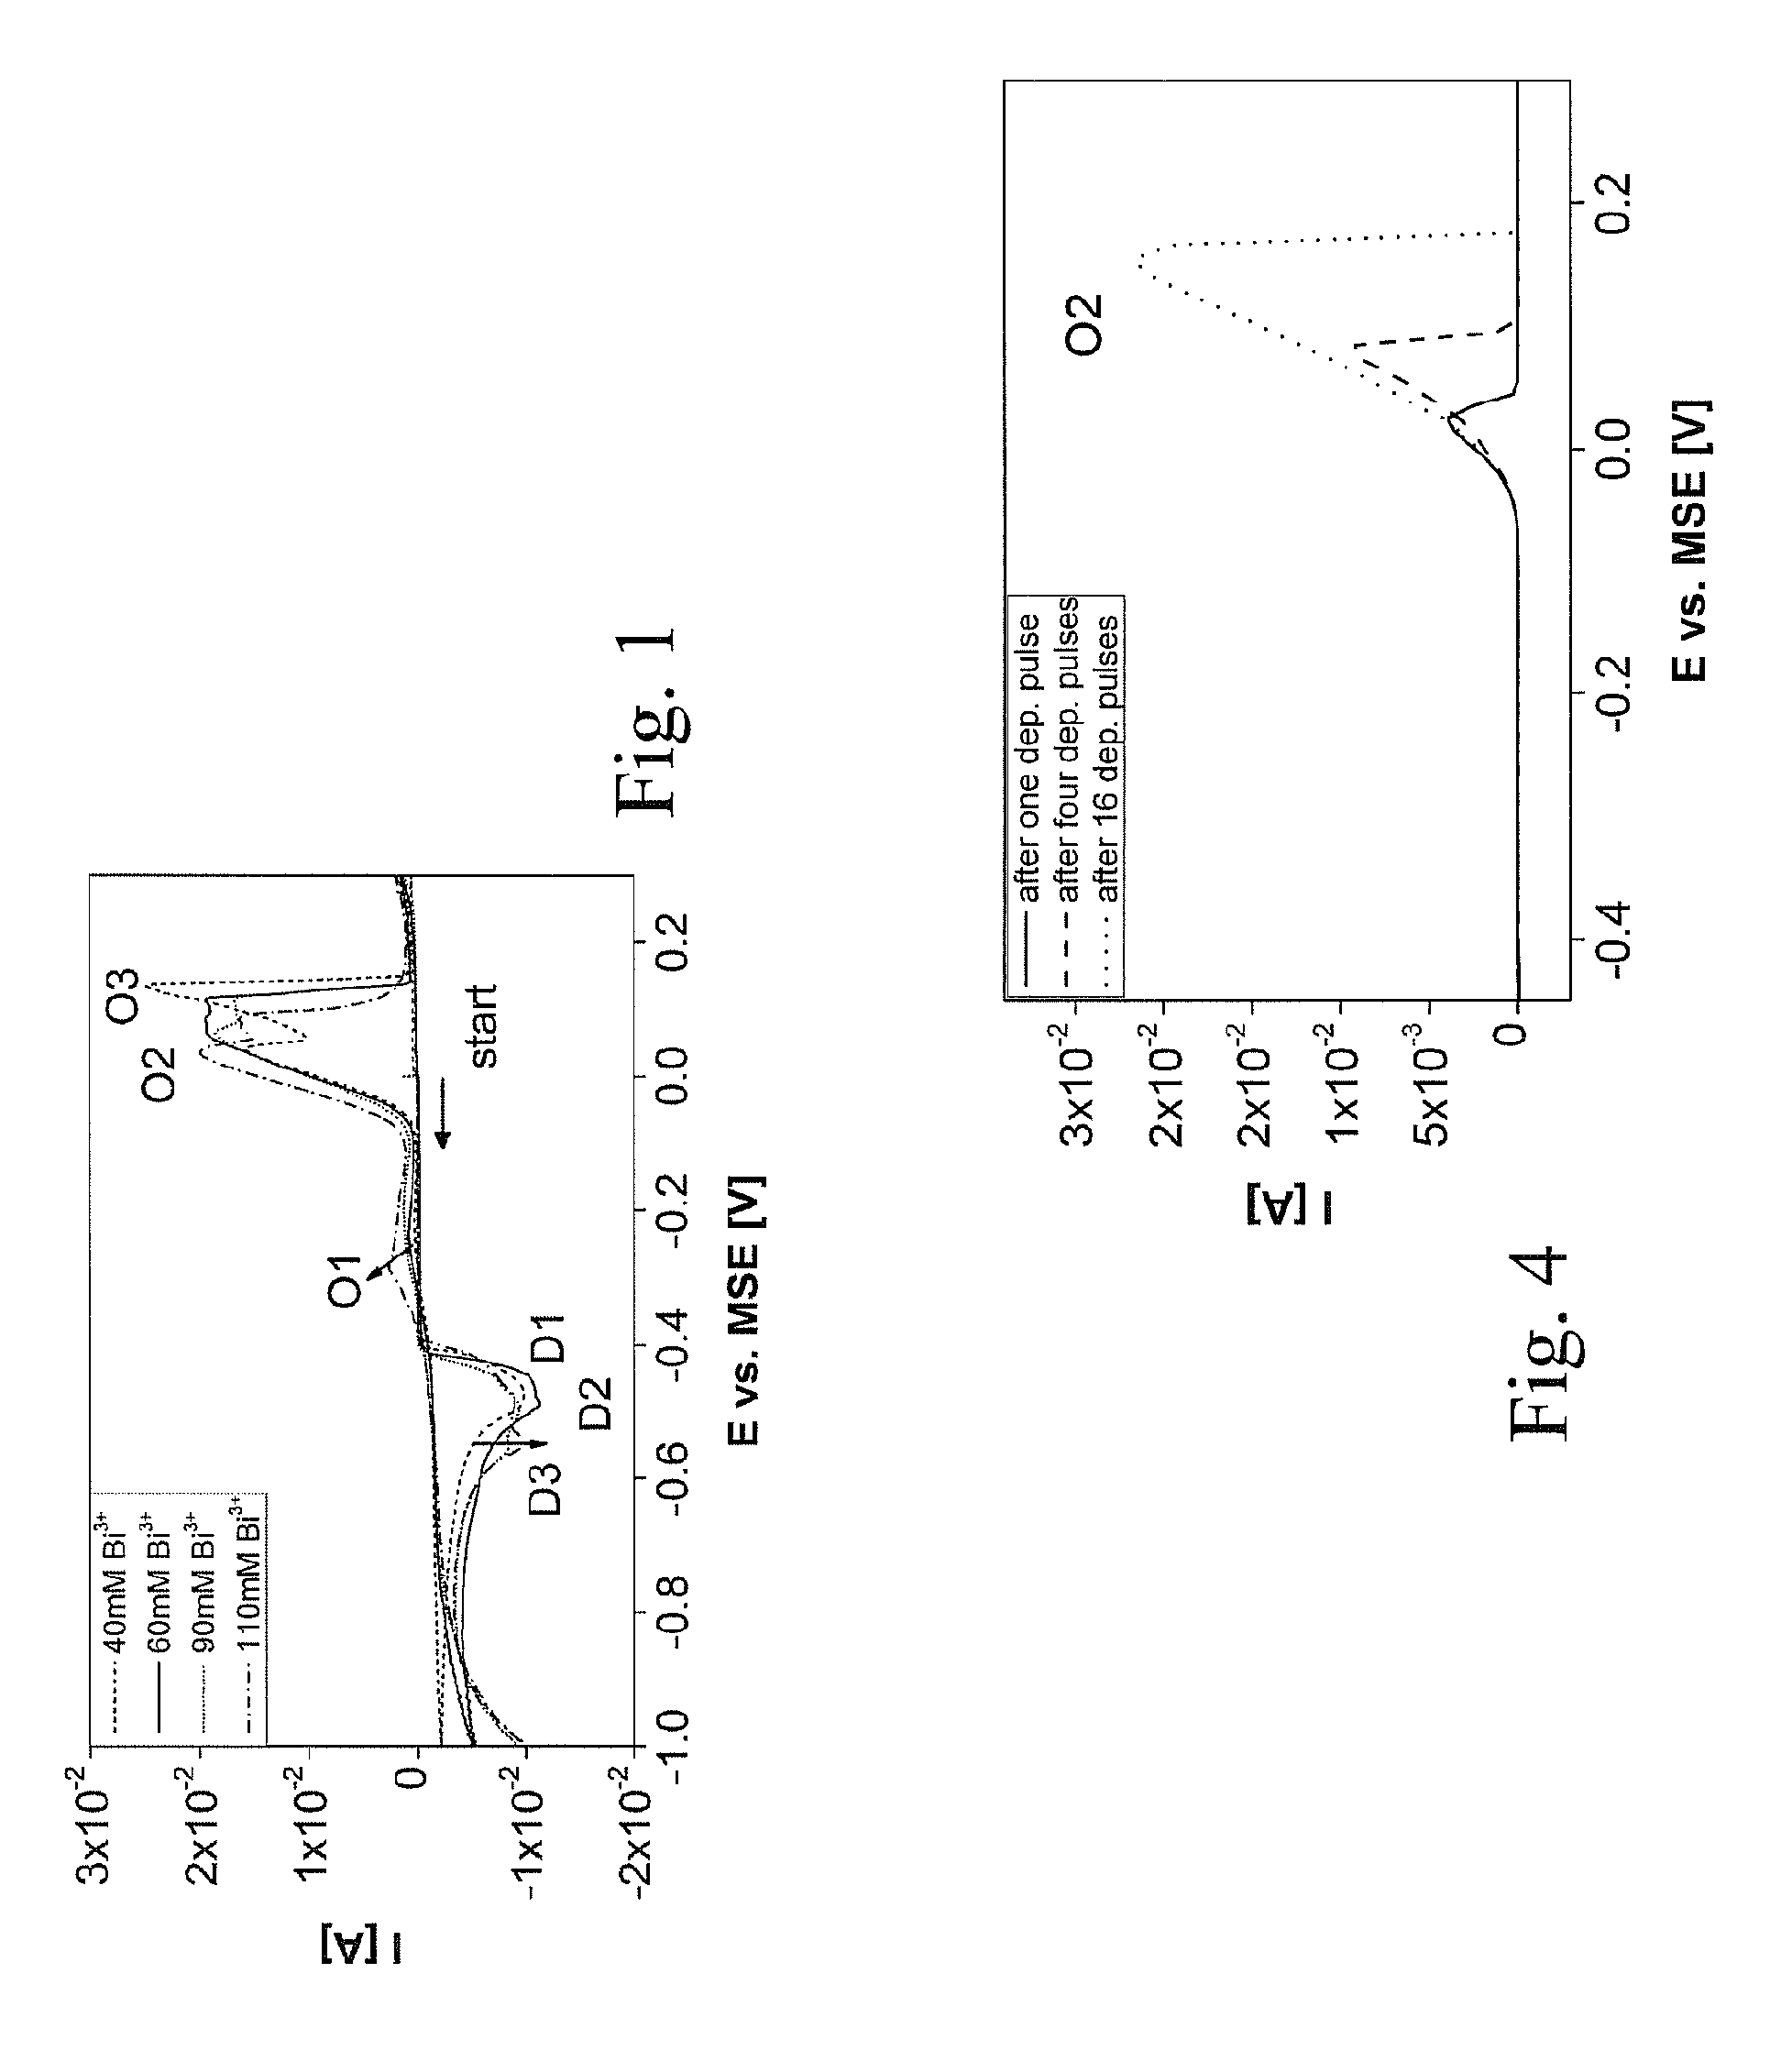 Device and method for the electrochemical deposition of chemical compounds and alloys with controlled composition and/or stoichiometry